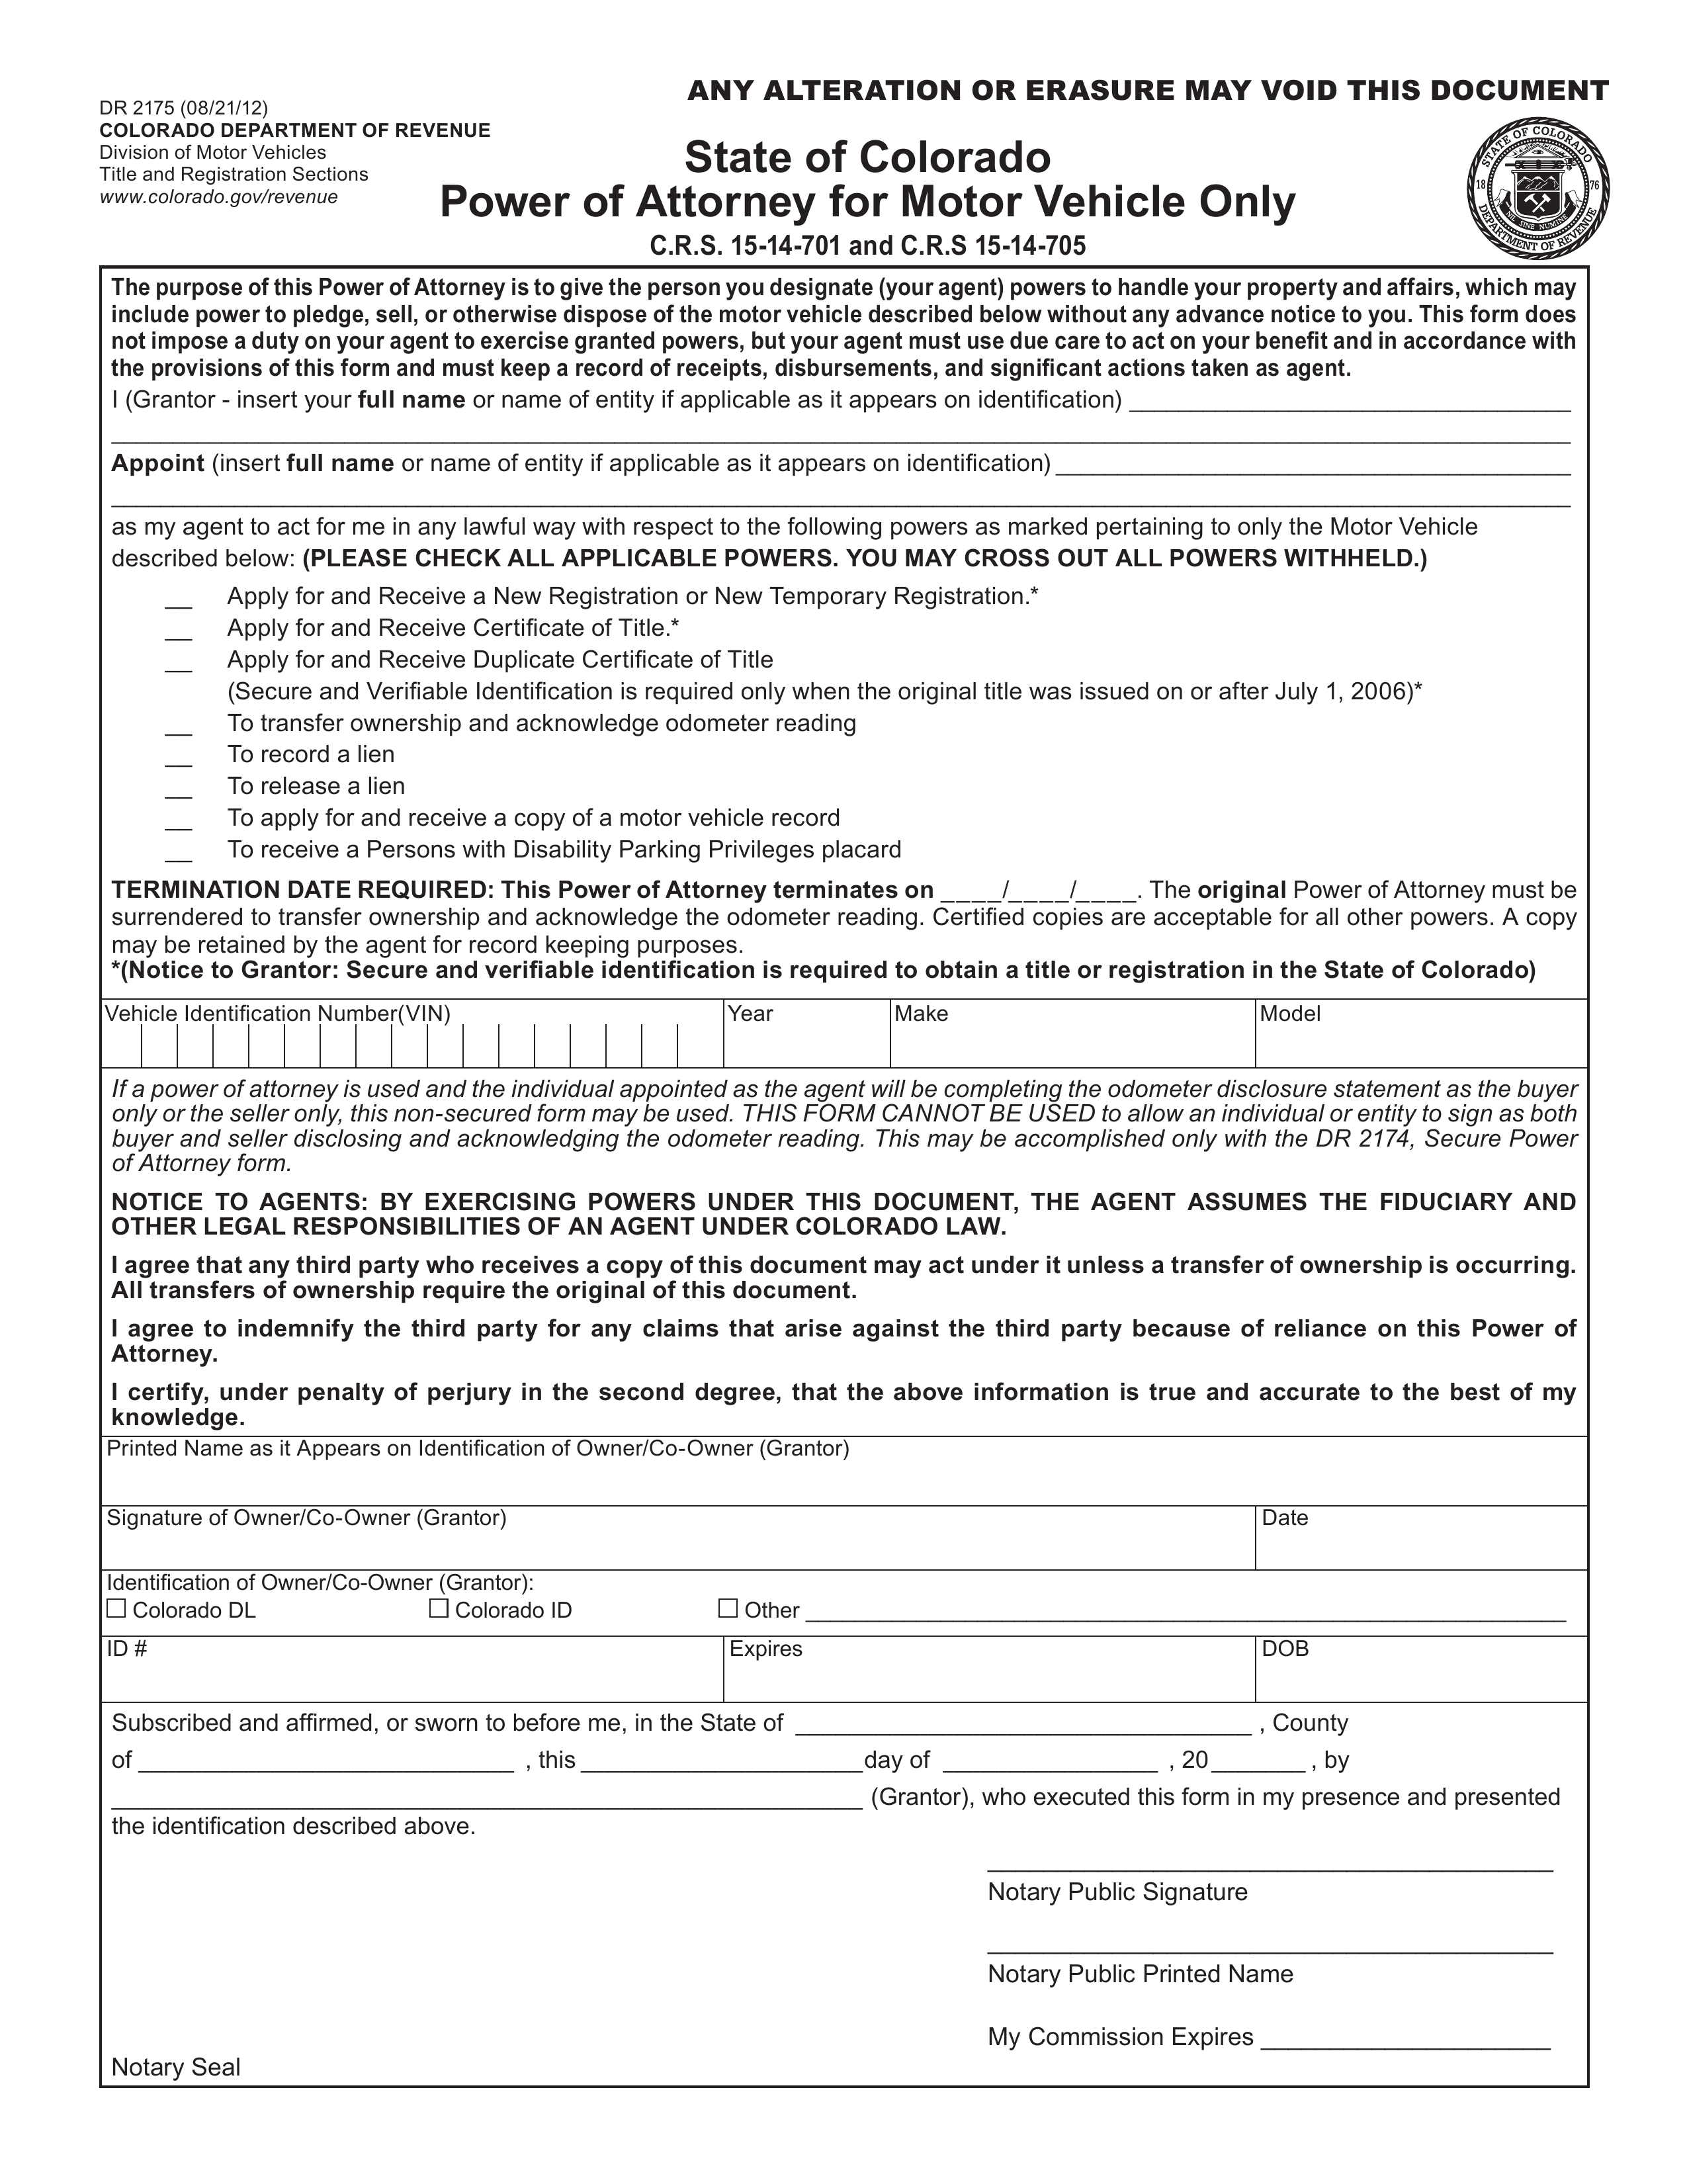 Colorado Motor Vehicle Power of Attorney (Form DR 2175)